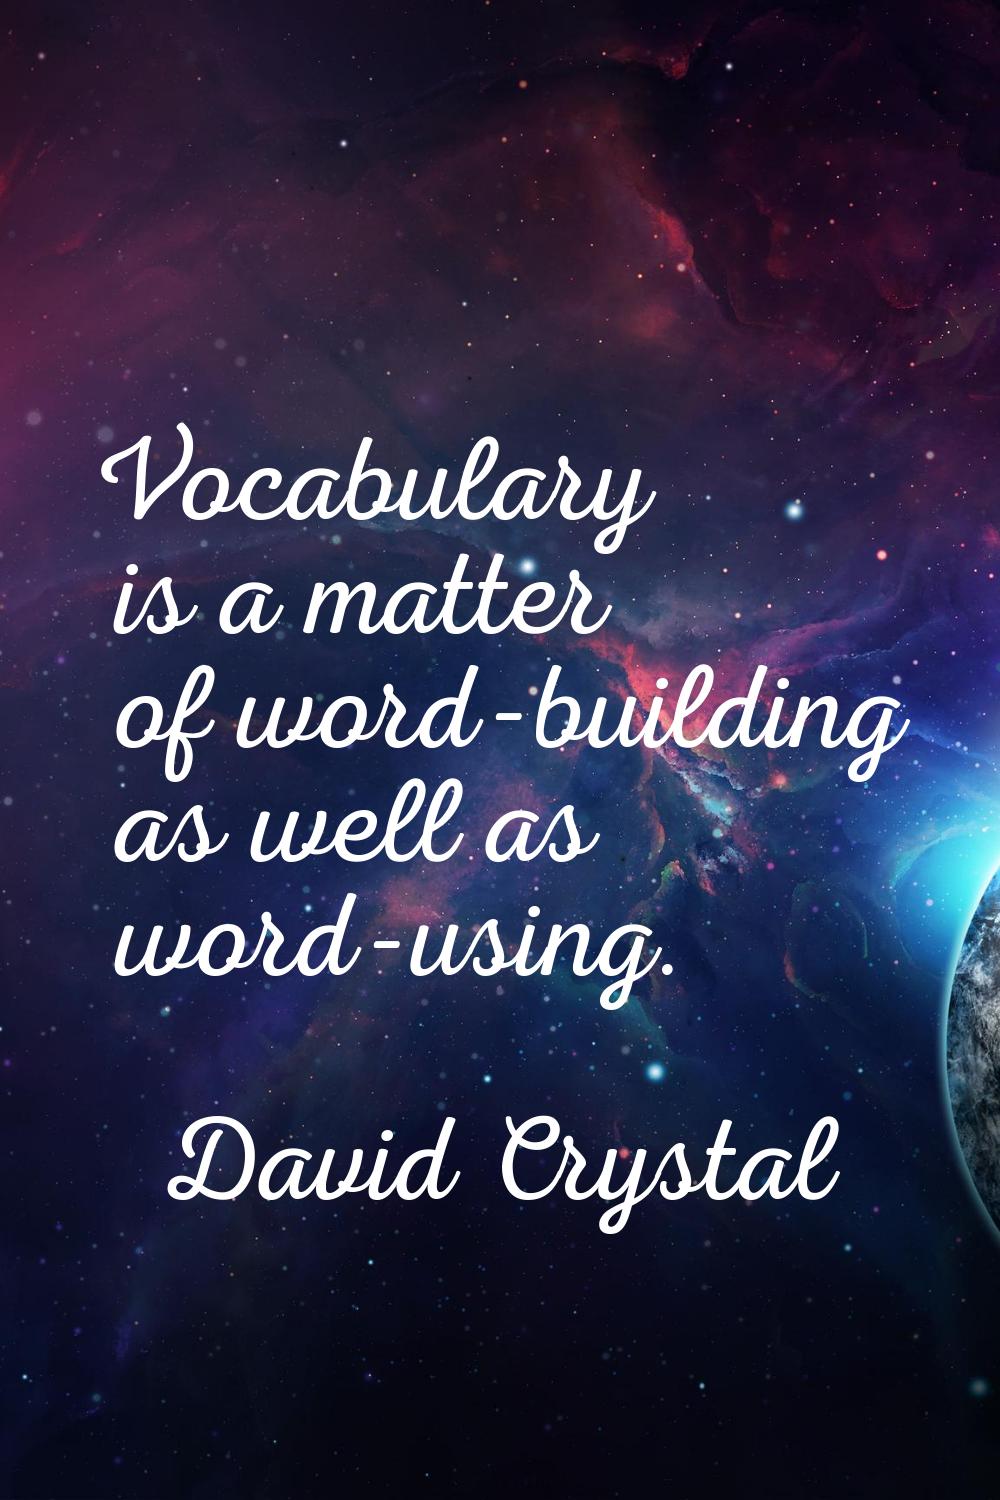 Vocabulary is a matter of word-building as well as word-using.